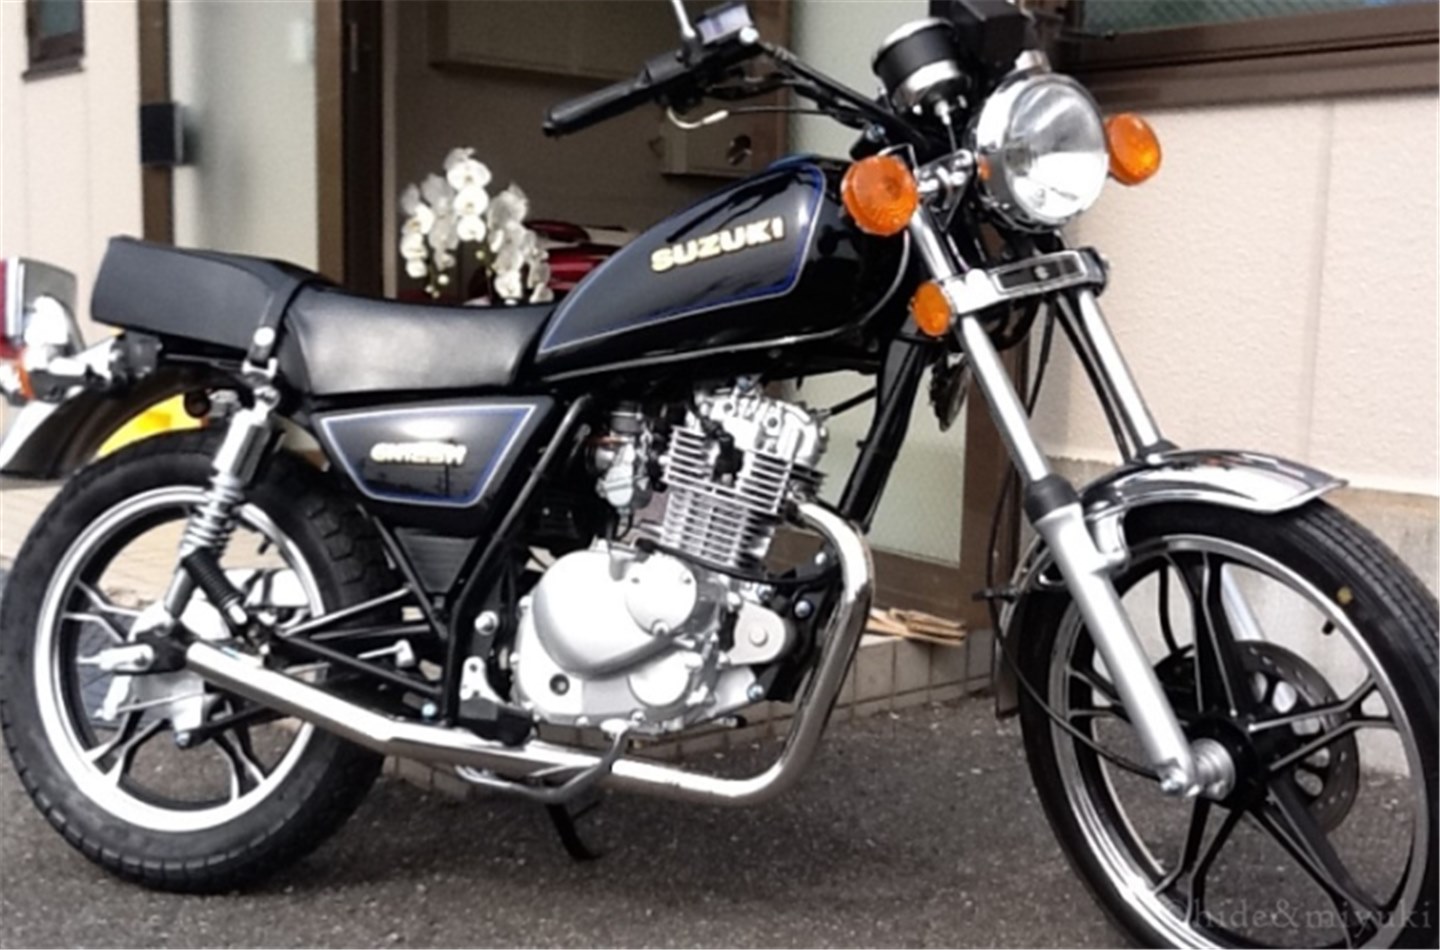 GN125】GN125Hに取り付け可能なマフラーをまとめてみました！ポン付け 